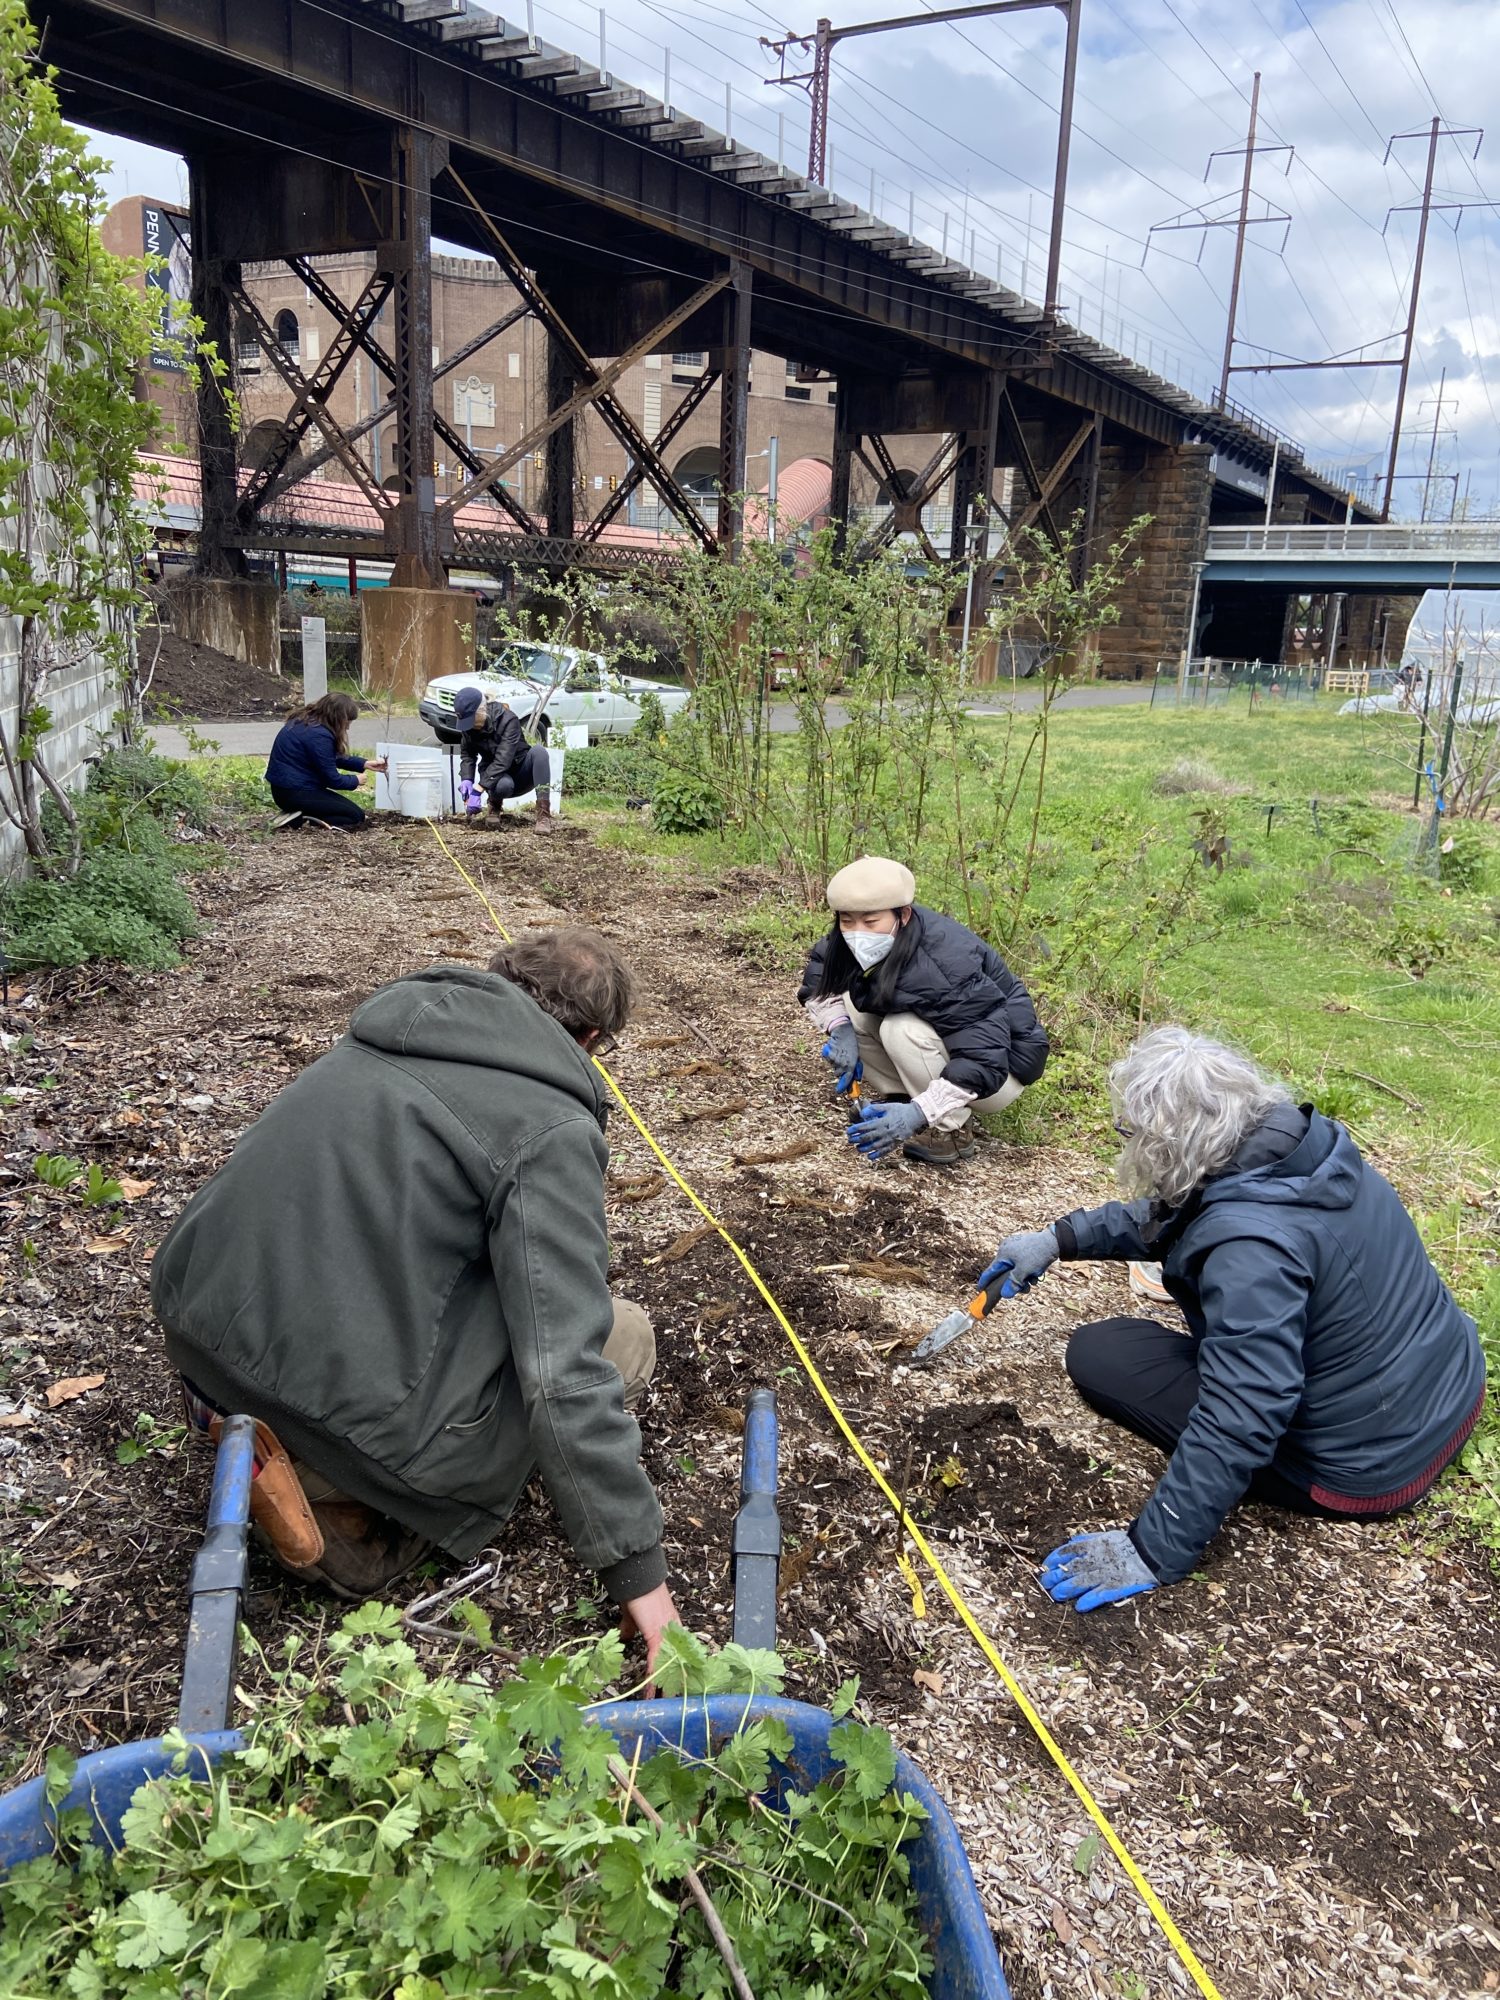 Volunteers sit or crouch on a mulched area alongside a yellow rope that marks where the berries are to be planted. It is early spring and the trees are just starting to show their leaves.  A raised train platform lurks in the background.